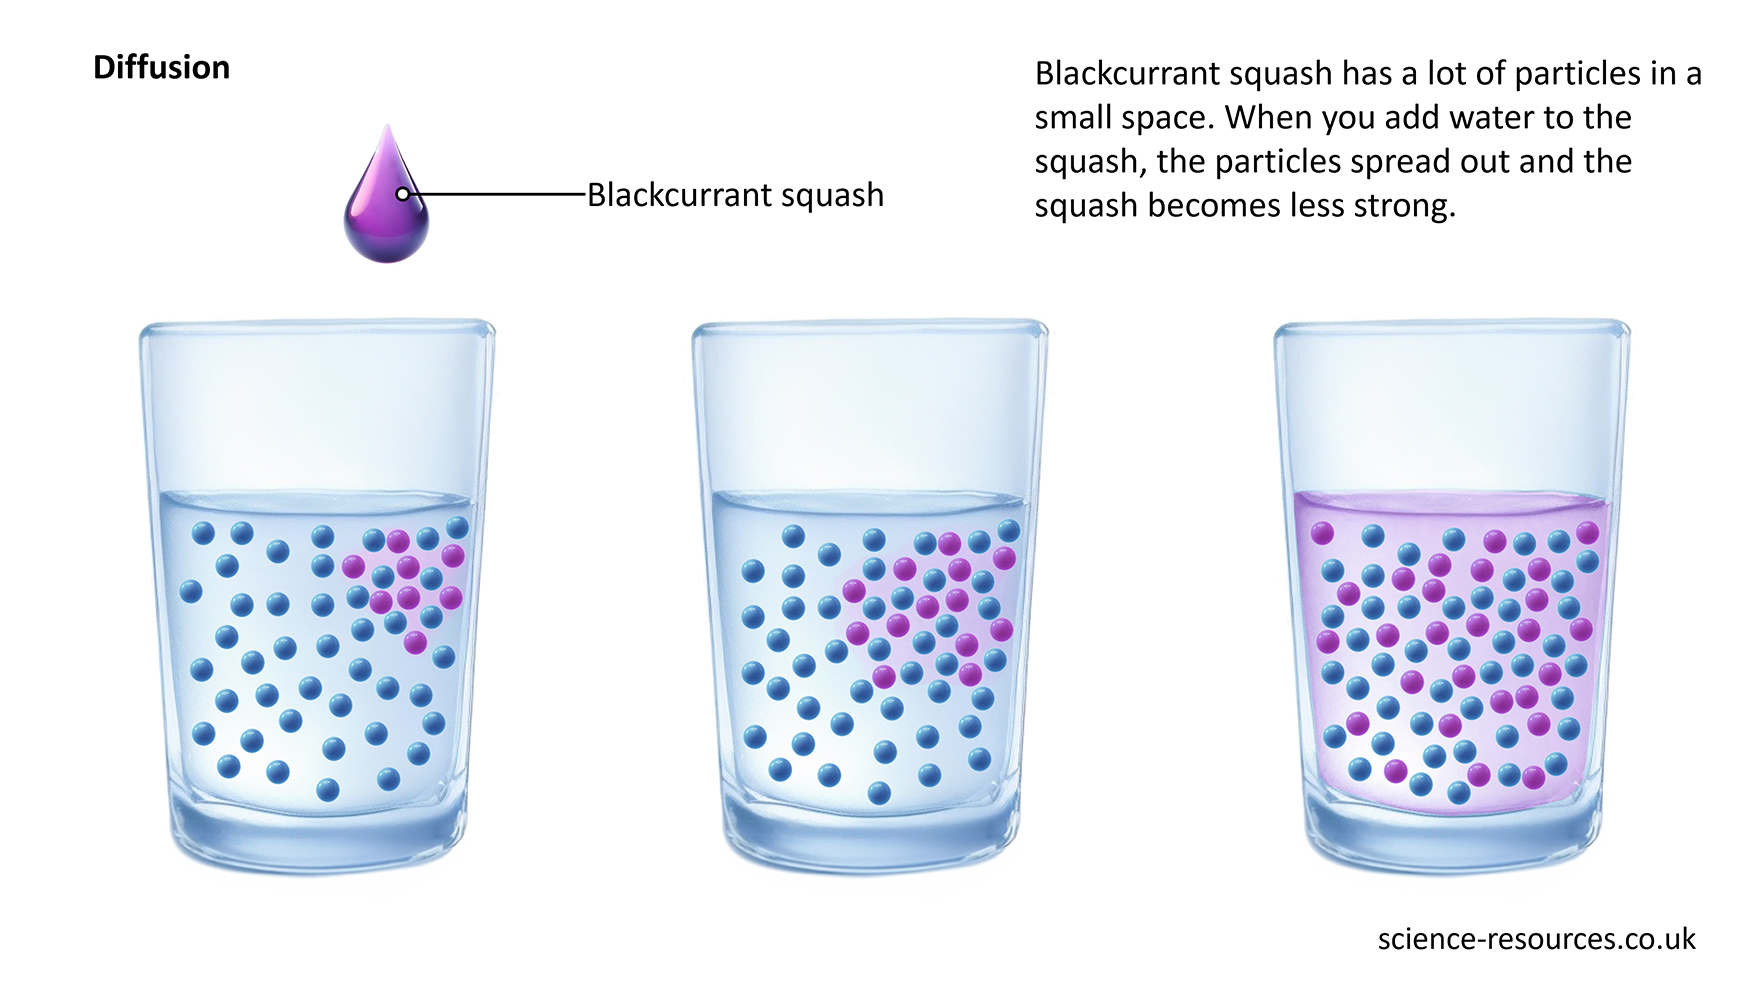 Diagram explaining the process of diffusion using blackcurrant squash as an example. It shows how the squash particles spread out and dilute in water over time. 